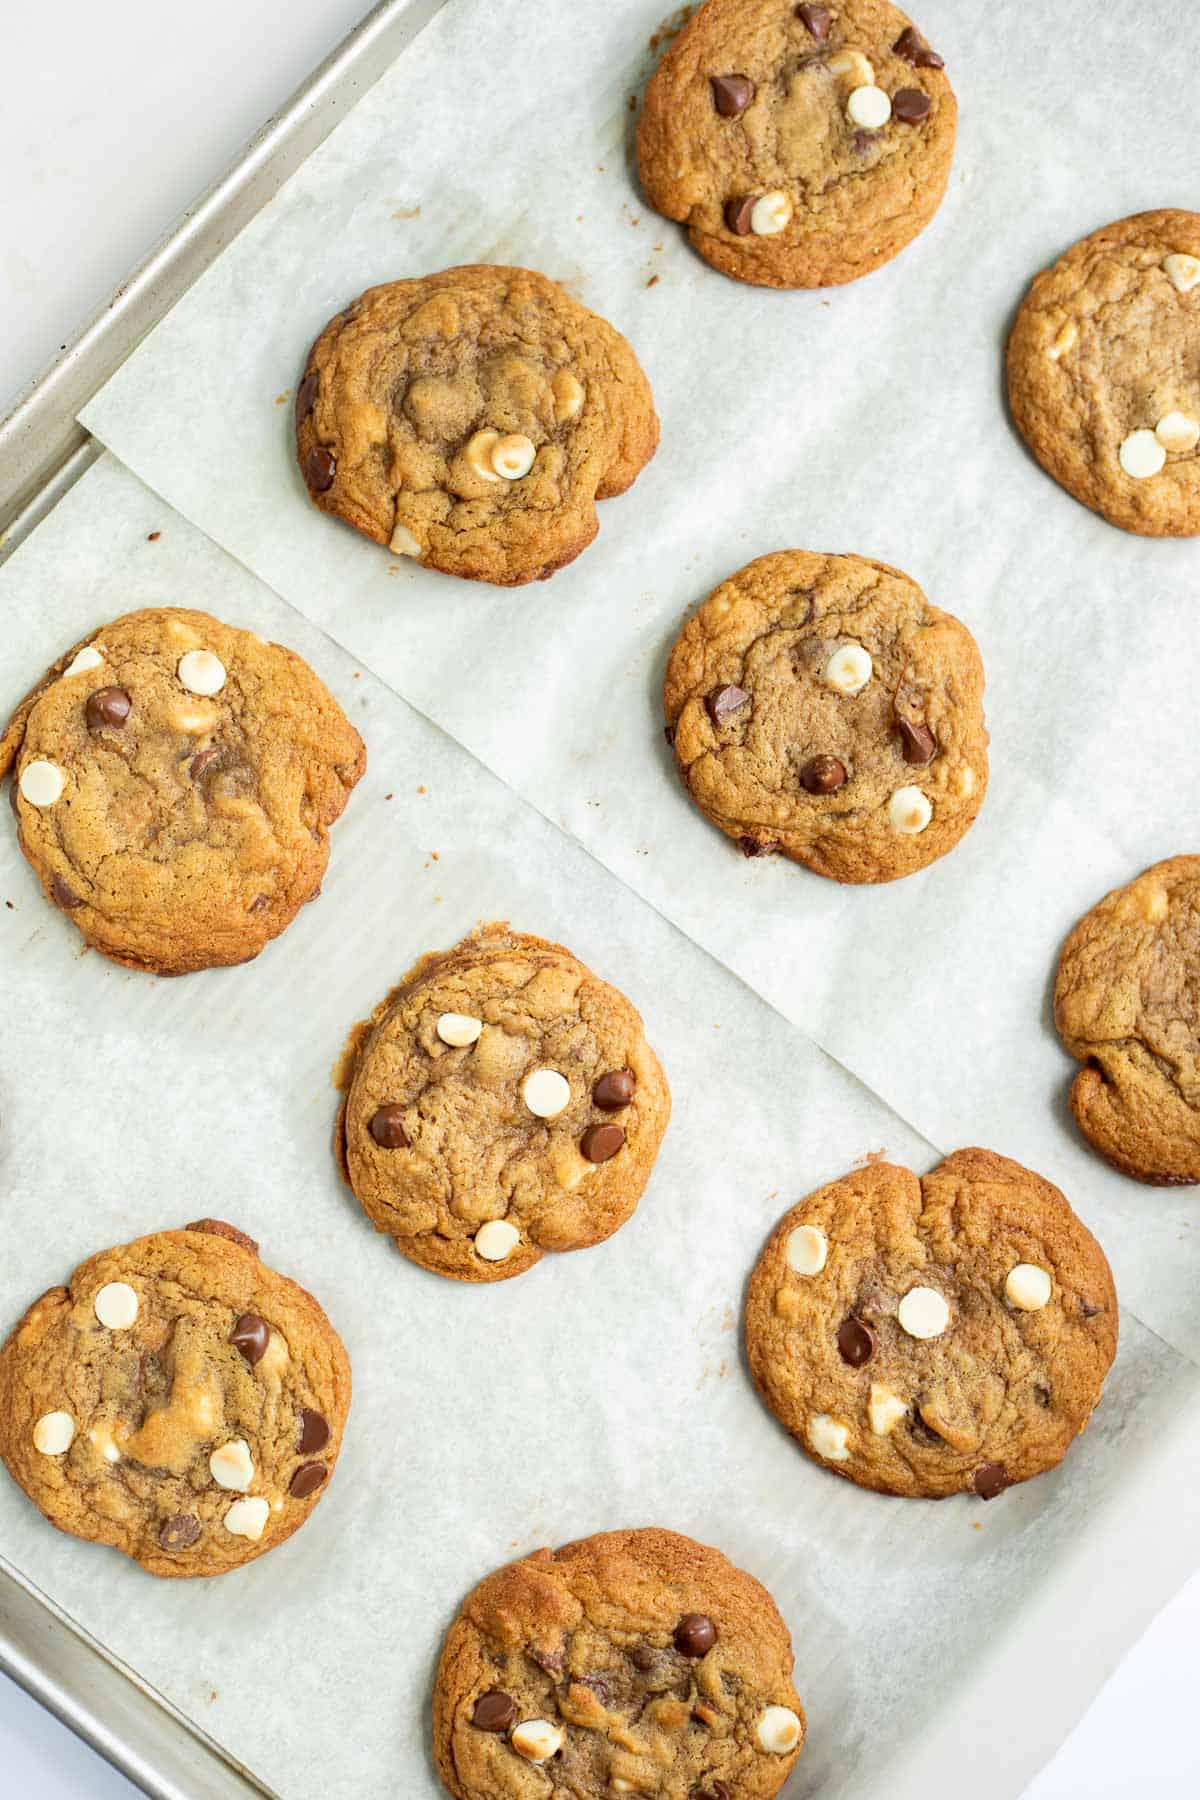 baked maple syrup chocolate chip cookies on a parchment lined baking sheet.